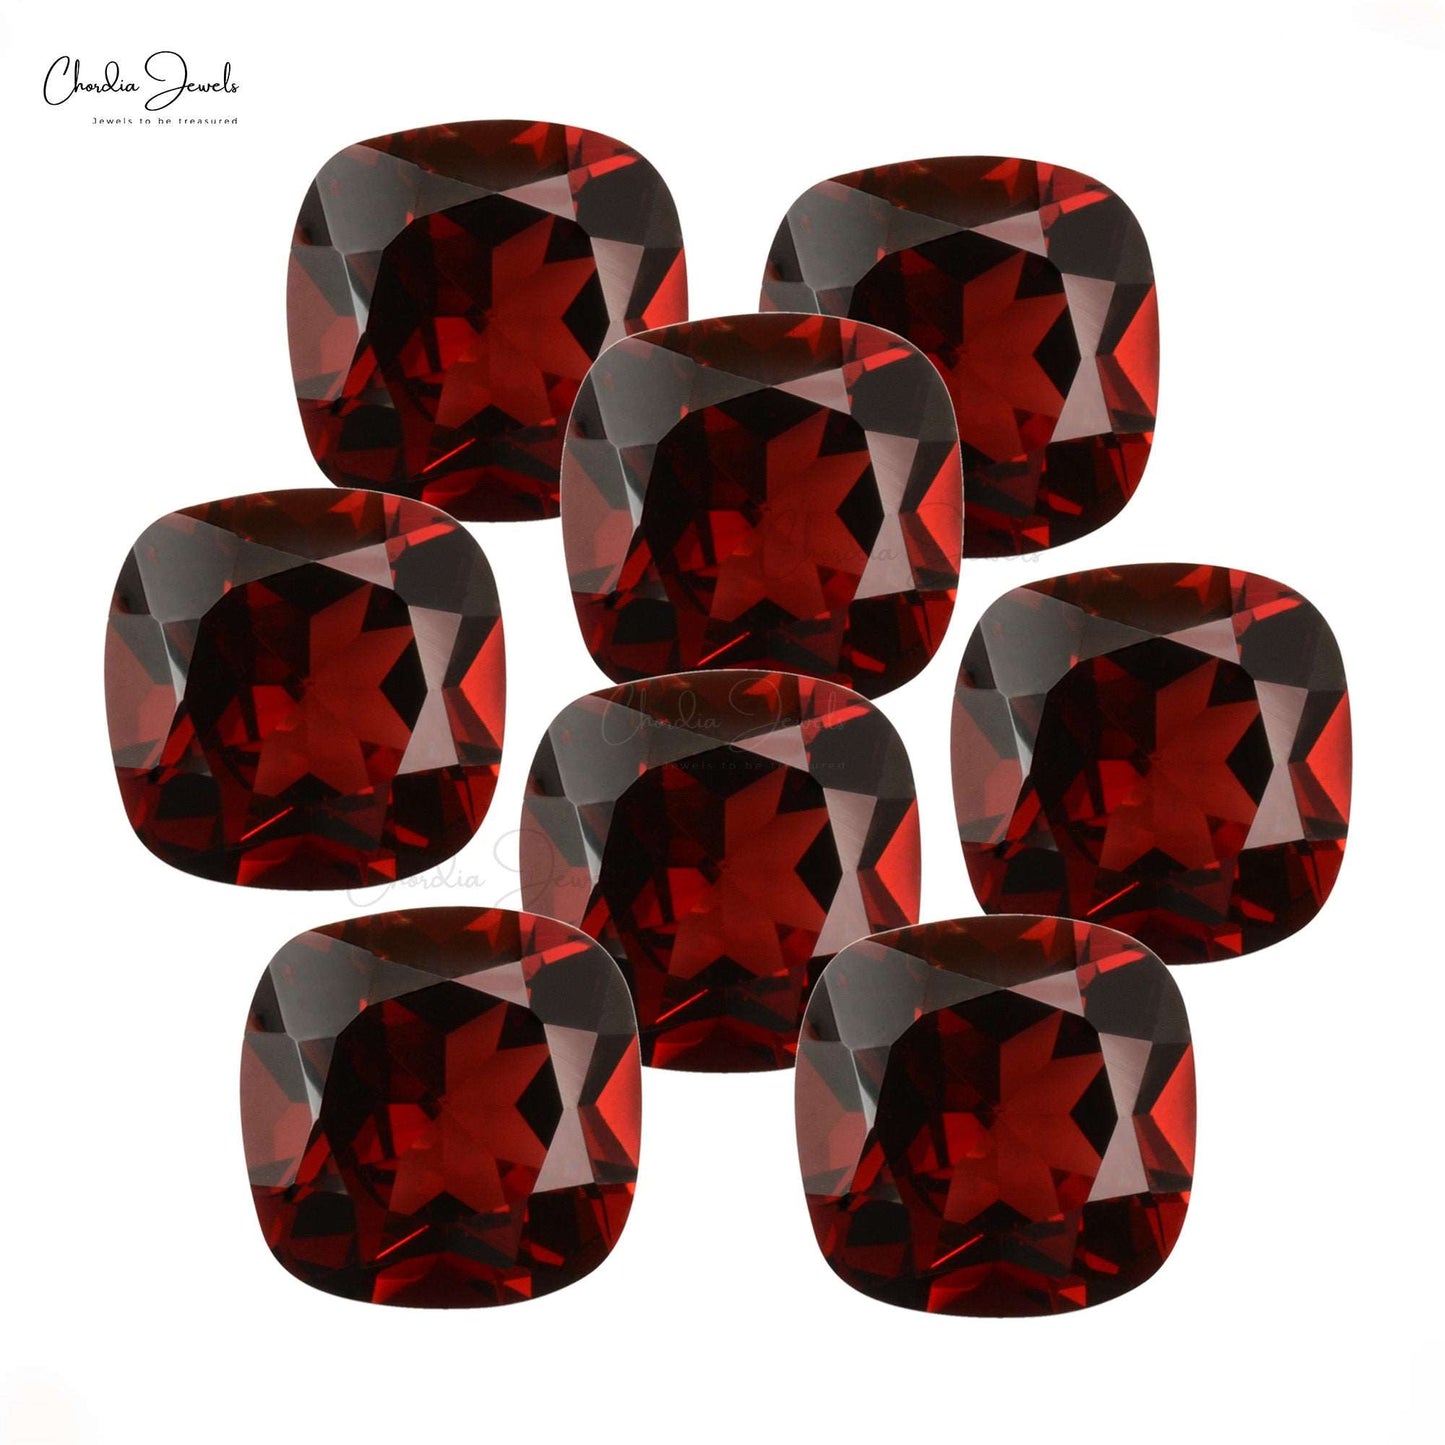 10MM Cushion Cut Garnet January Birthstone from Mozambique for Jewelry, Piece